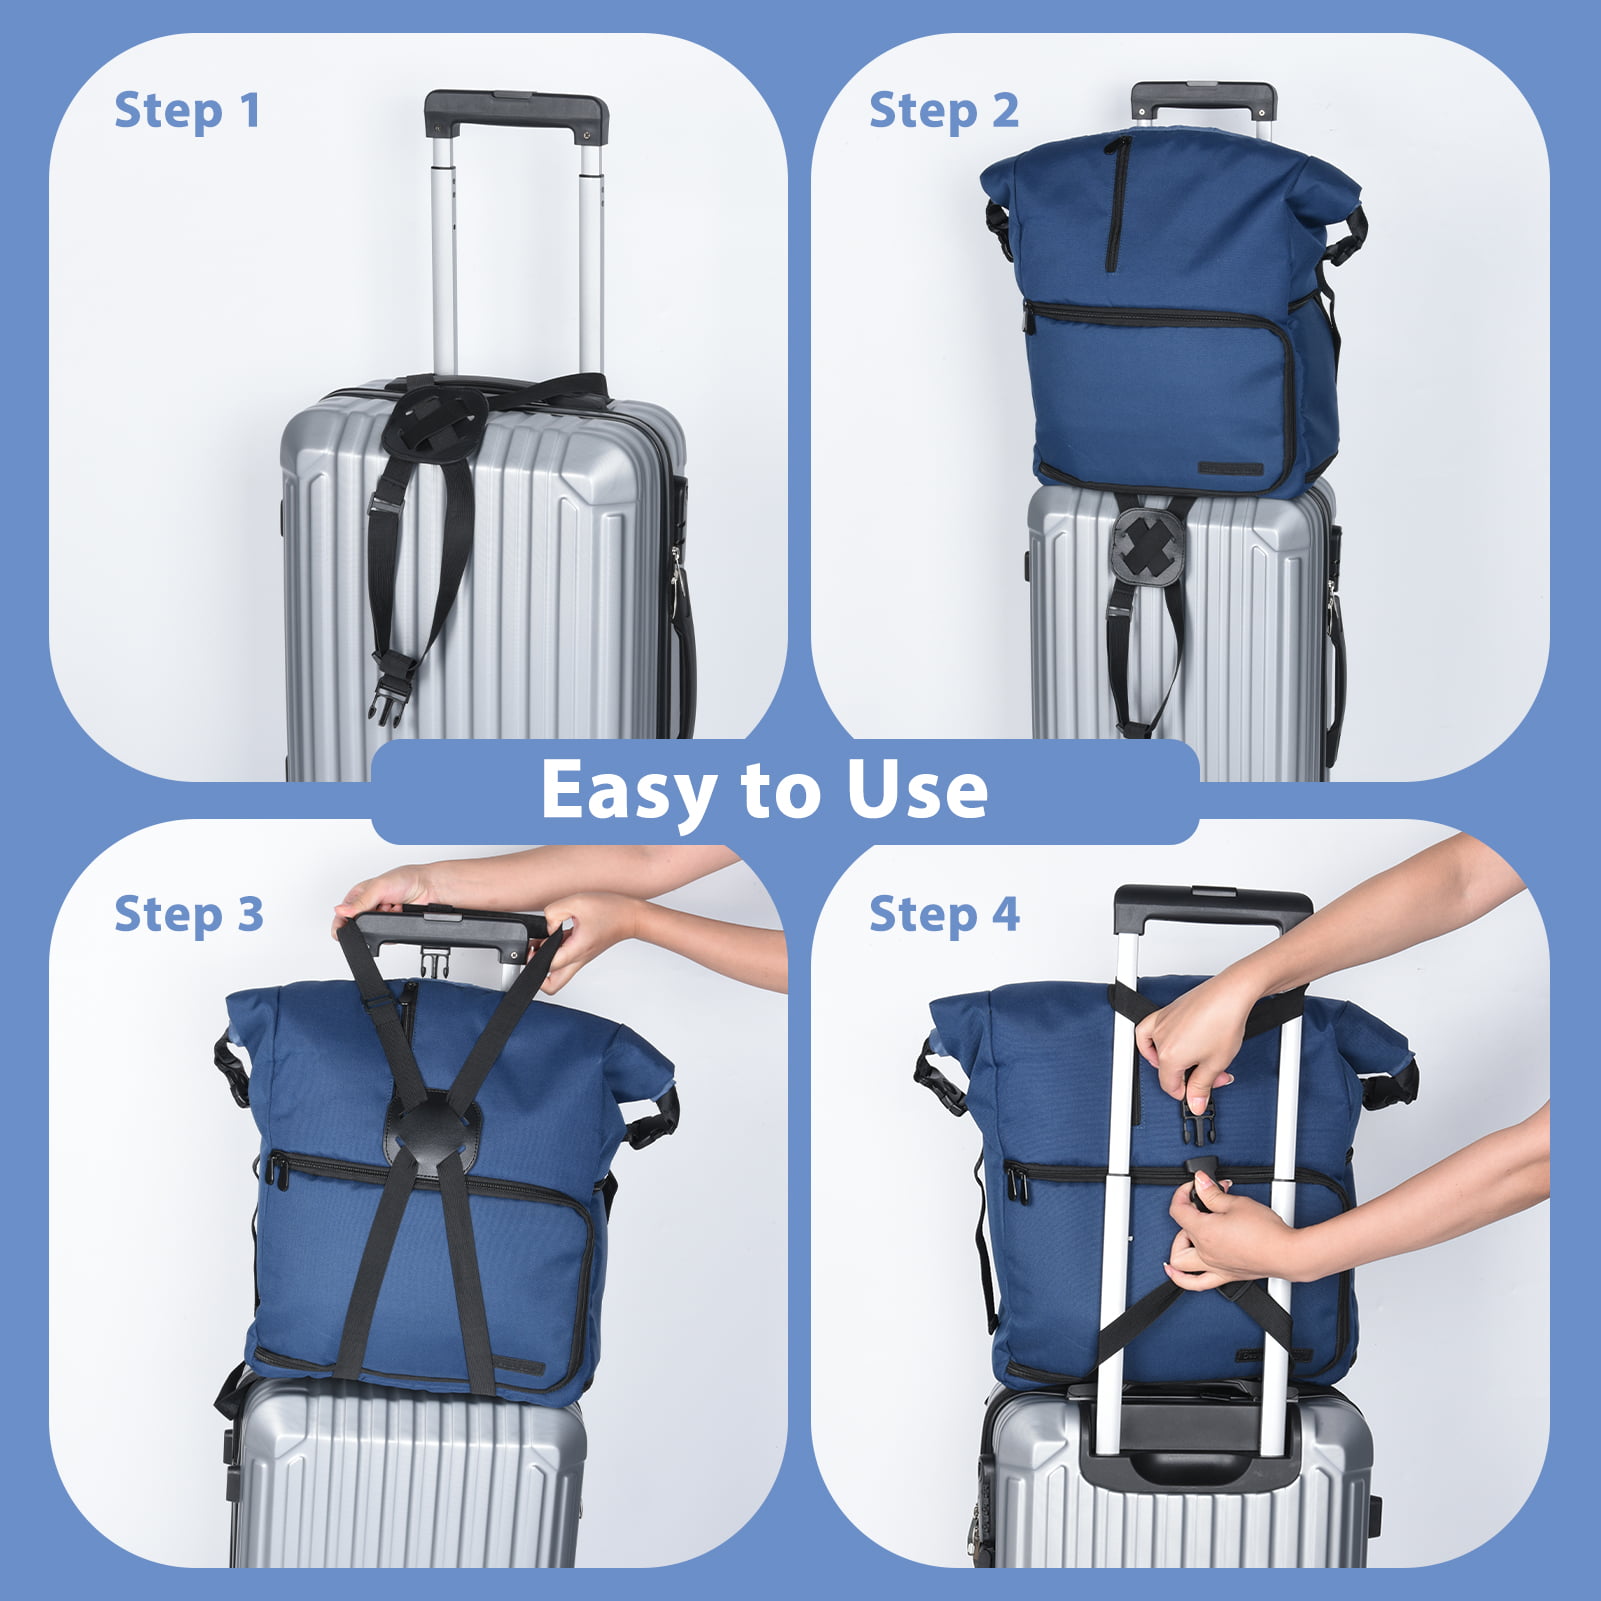  Tuegher Luggage Straps for Suitcases add a Bag, Travel